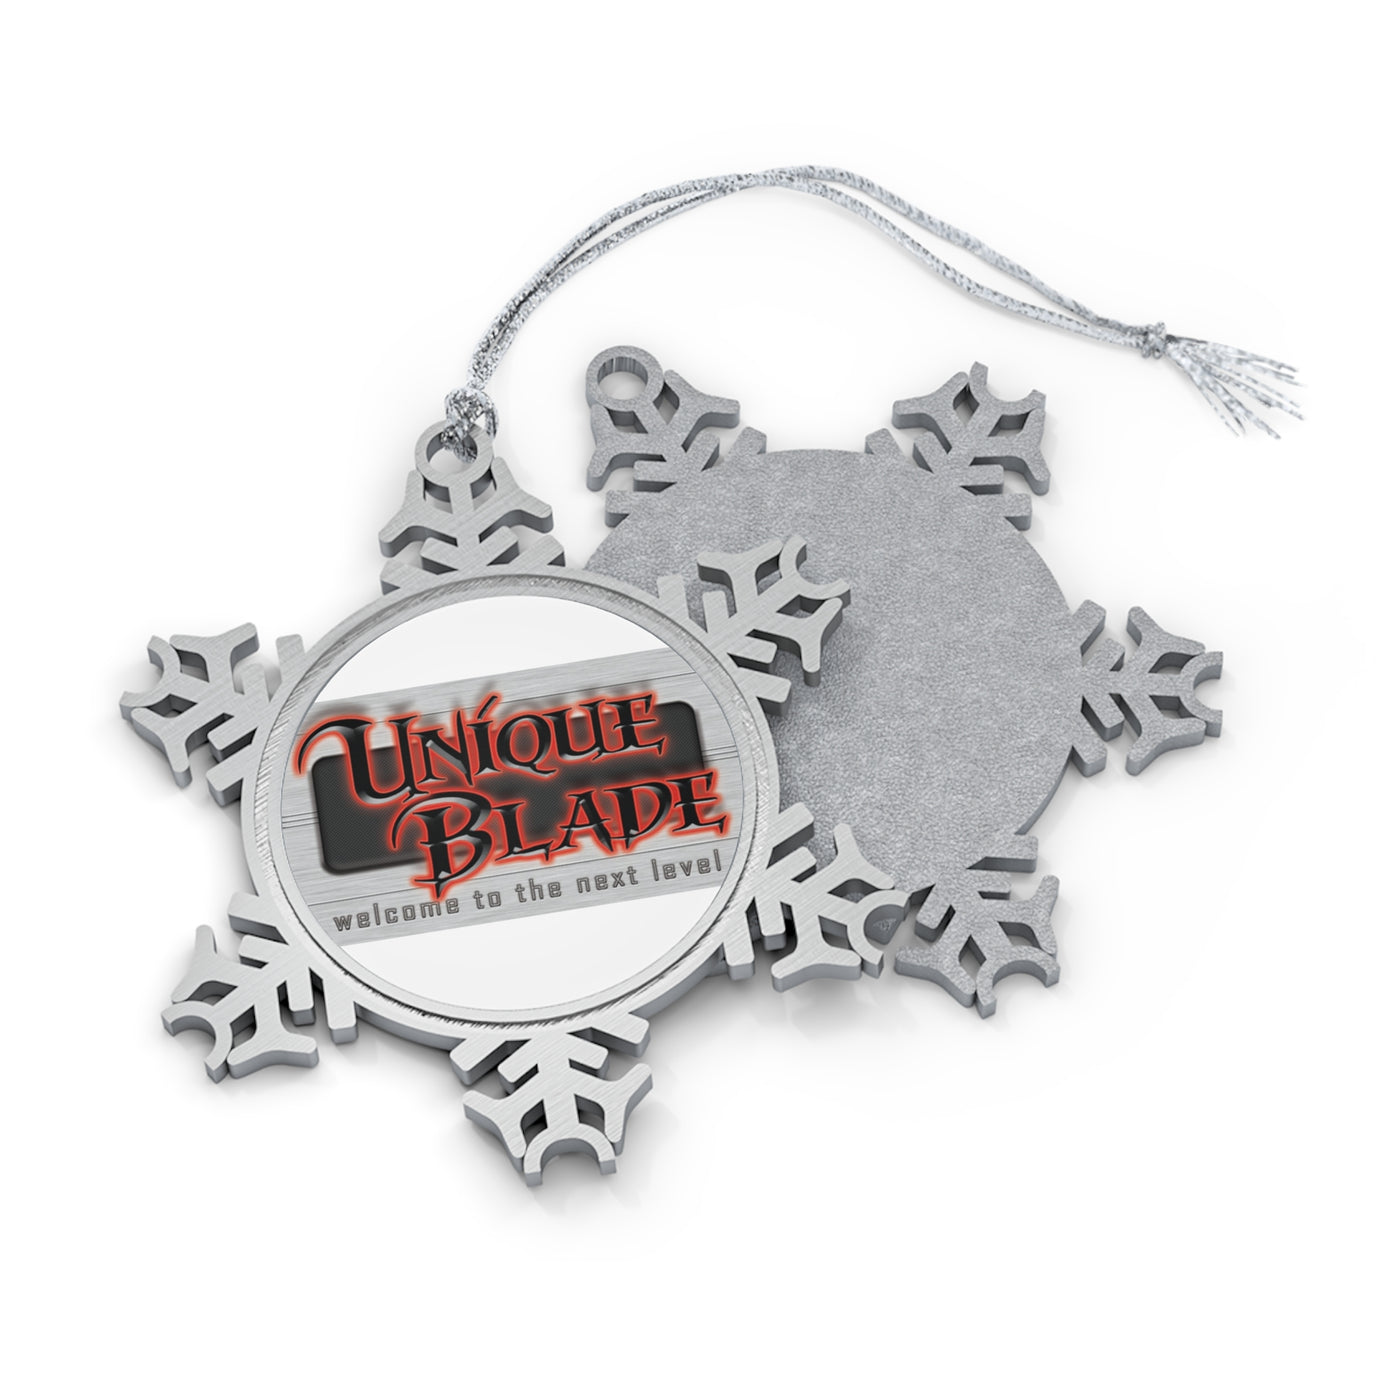  Pewter Snowflake Ornament - Intricately designed holiday decoration crafted from pewter, ideal for festive adornment during winter celebrations.